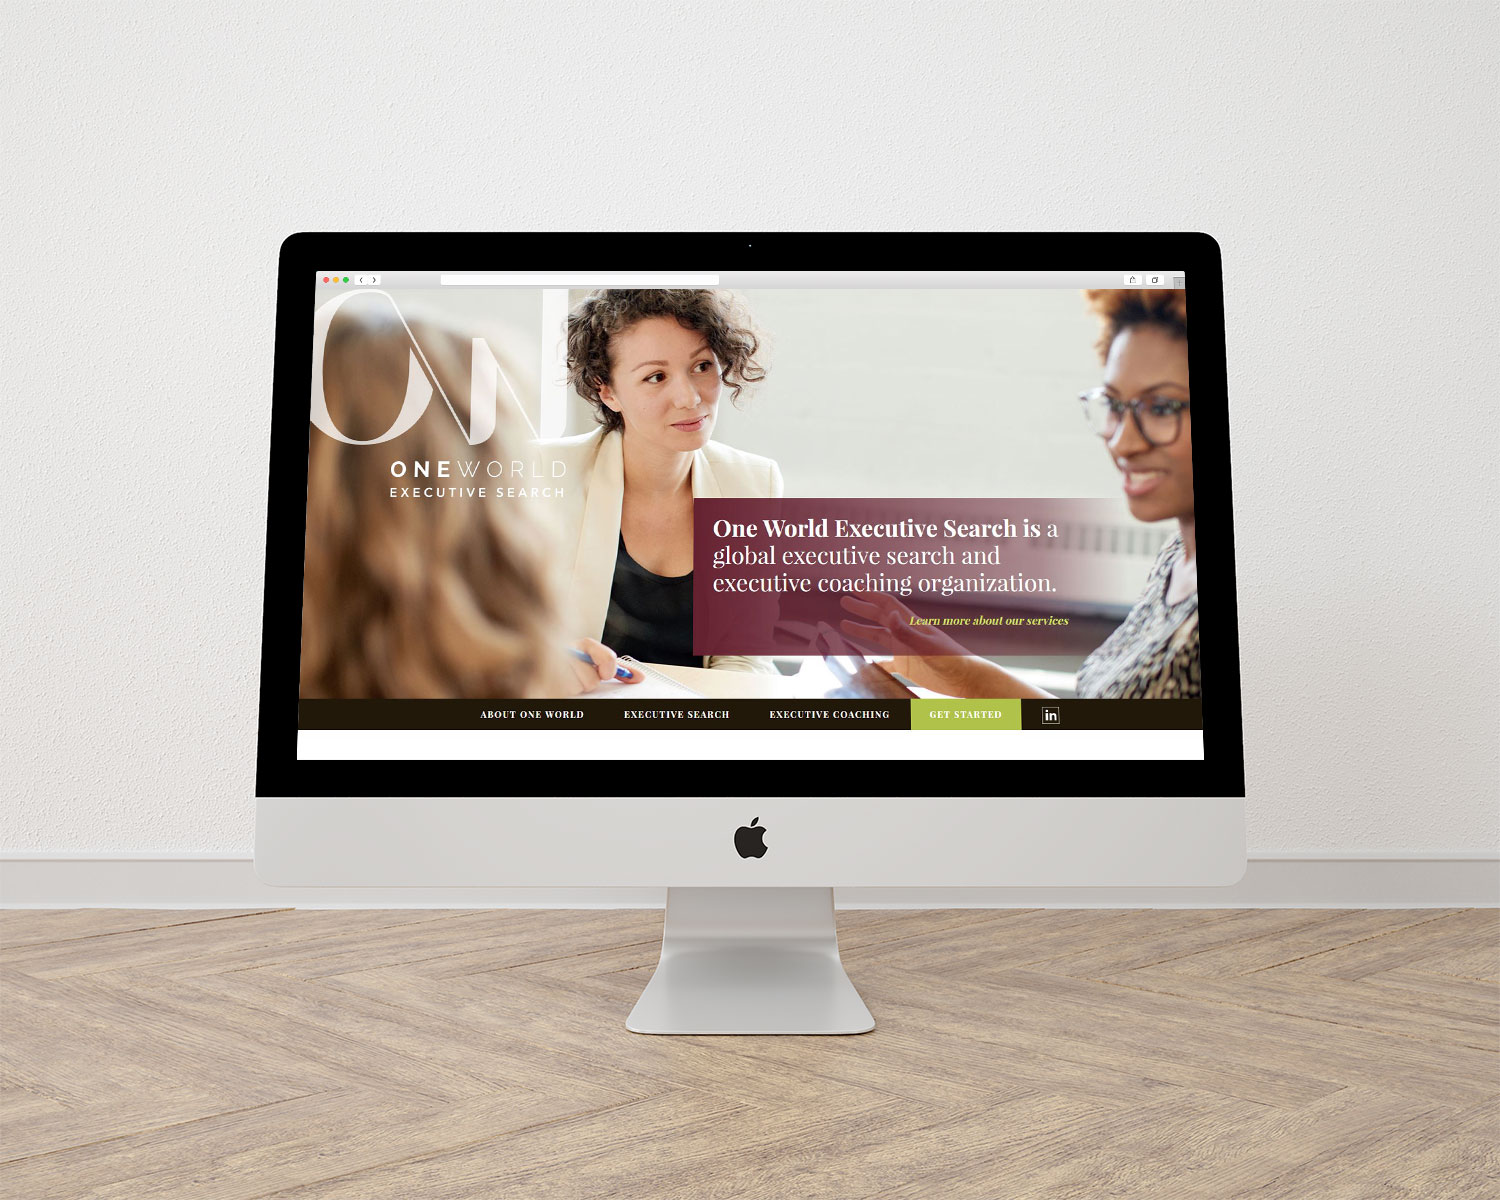 One World Executive Search Website designed by Fingerprint Marketing